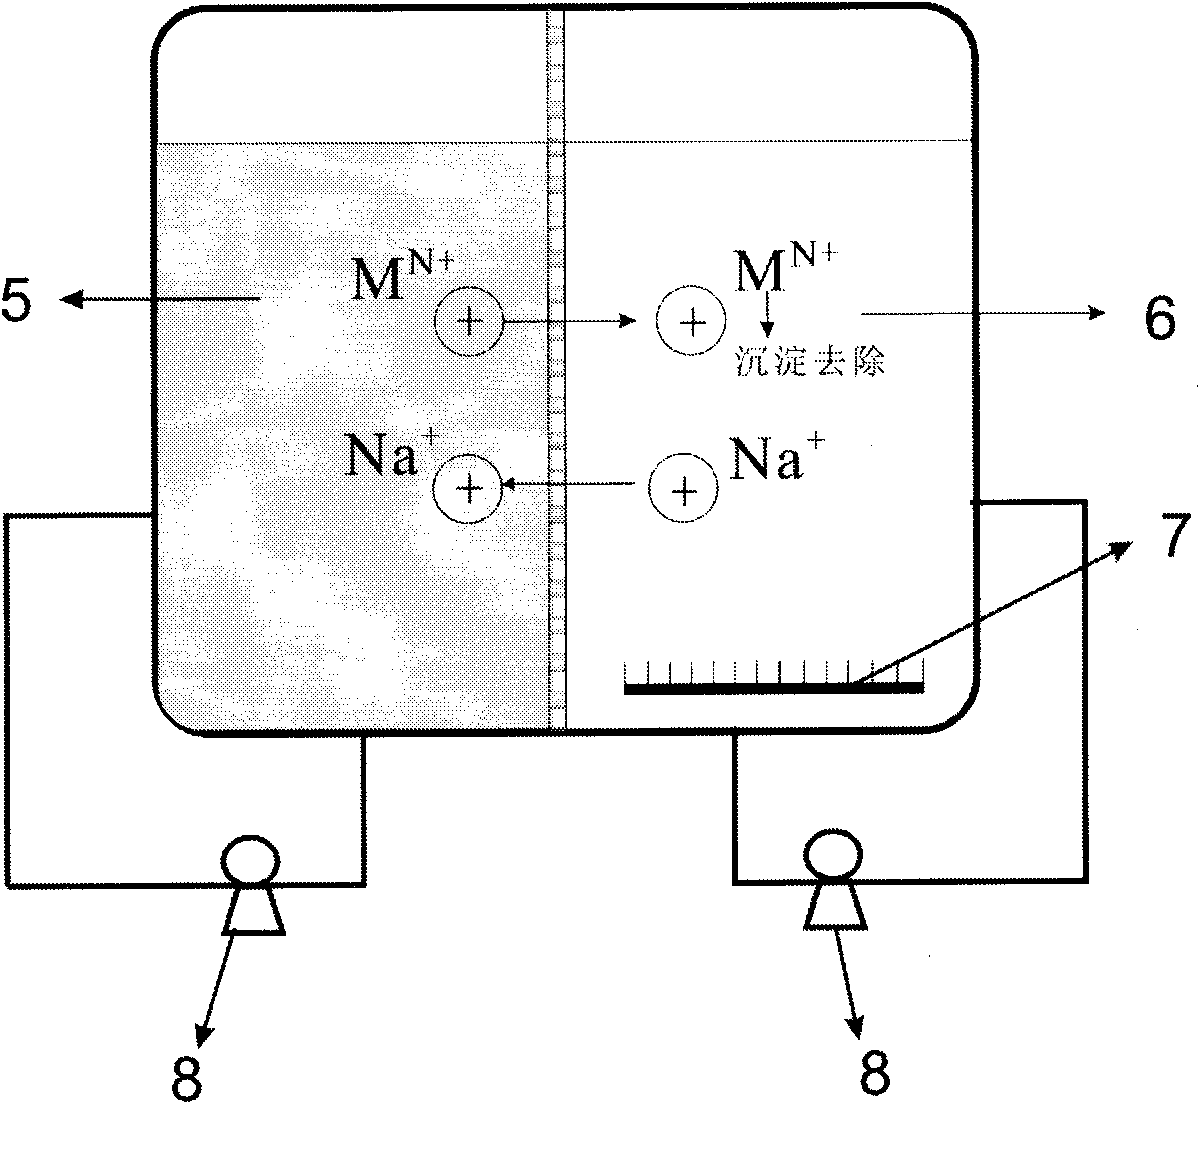 Method for removing heavy metals in water by collaboration of dialysis through ion exchange membrane and chemical precipitation